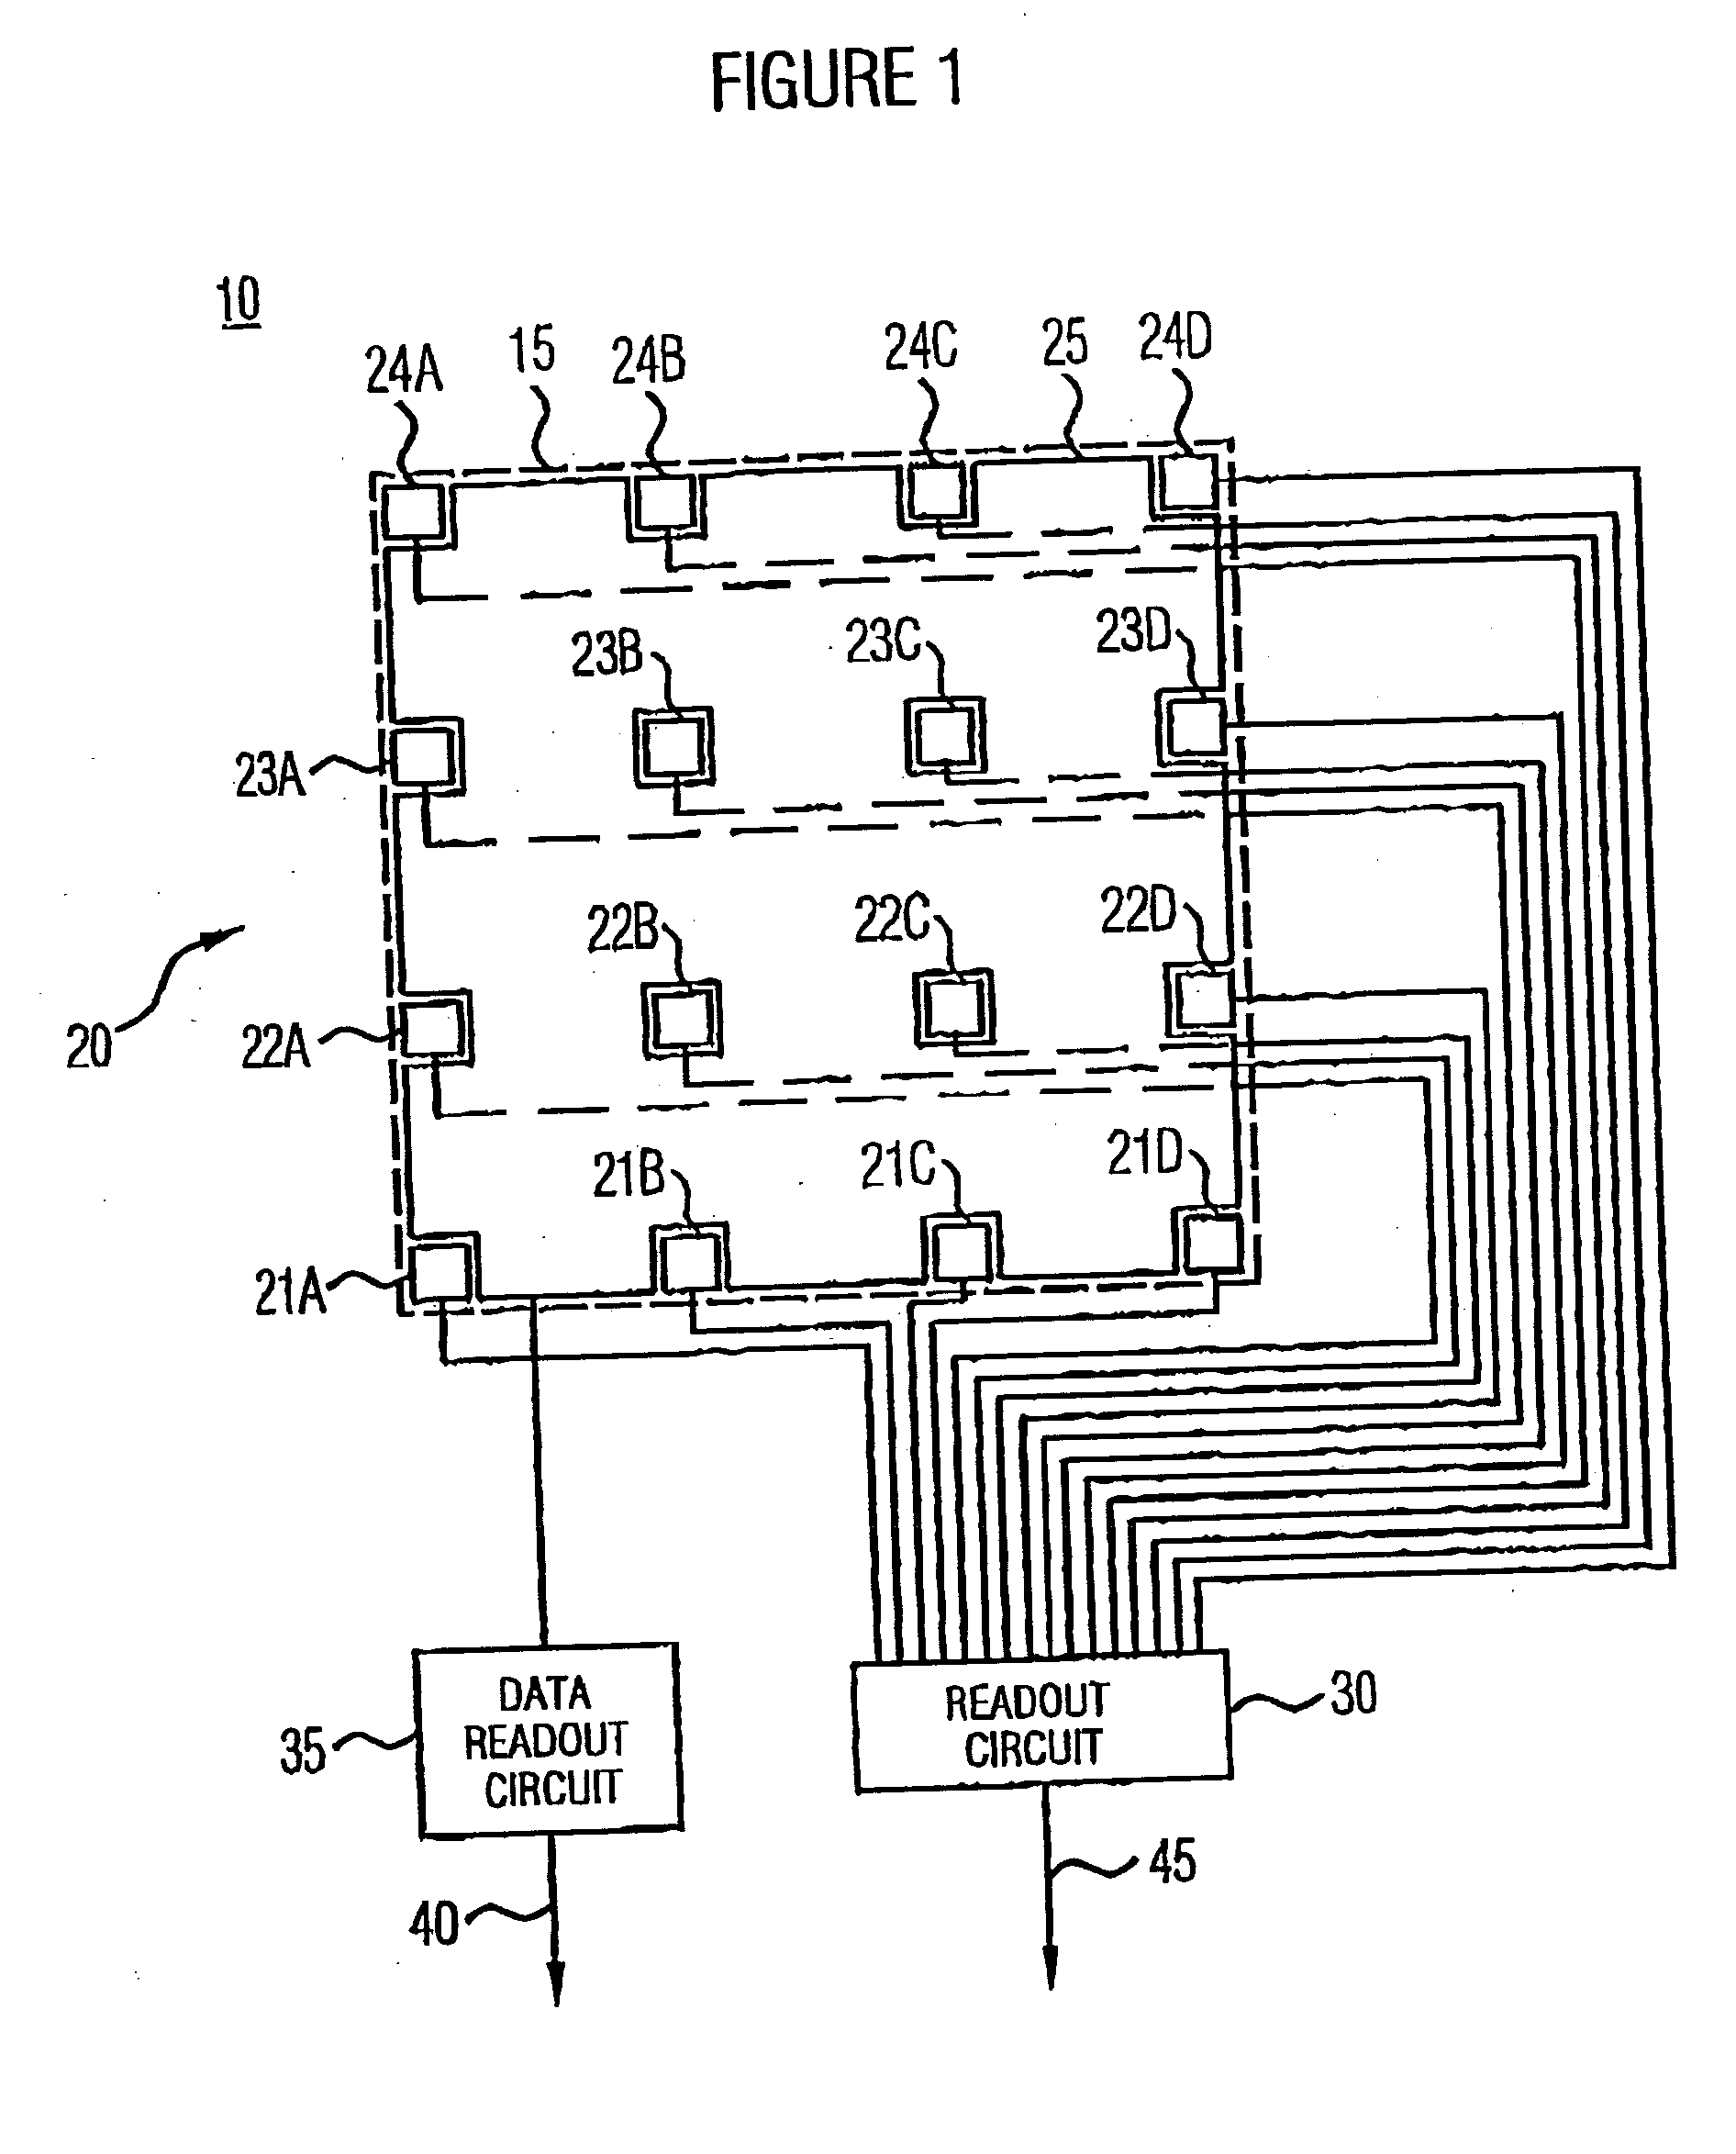 Optical detection device